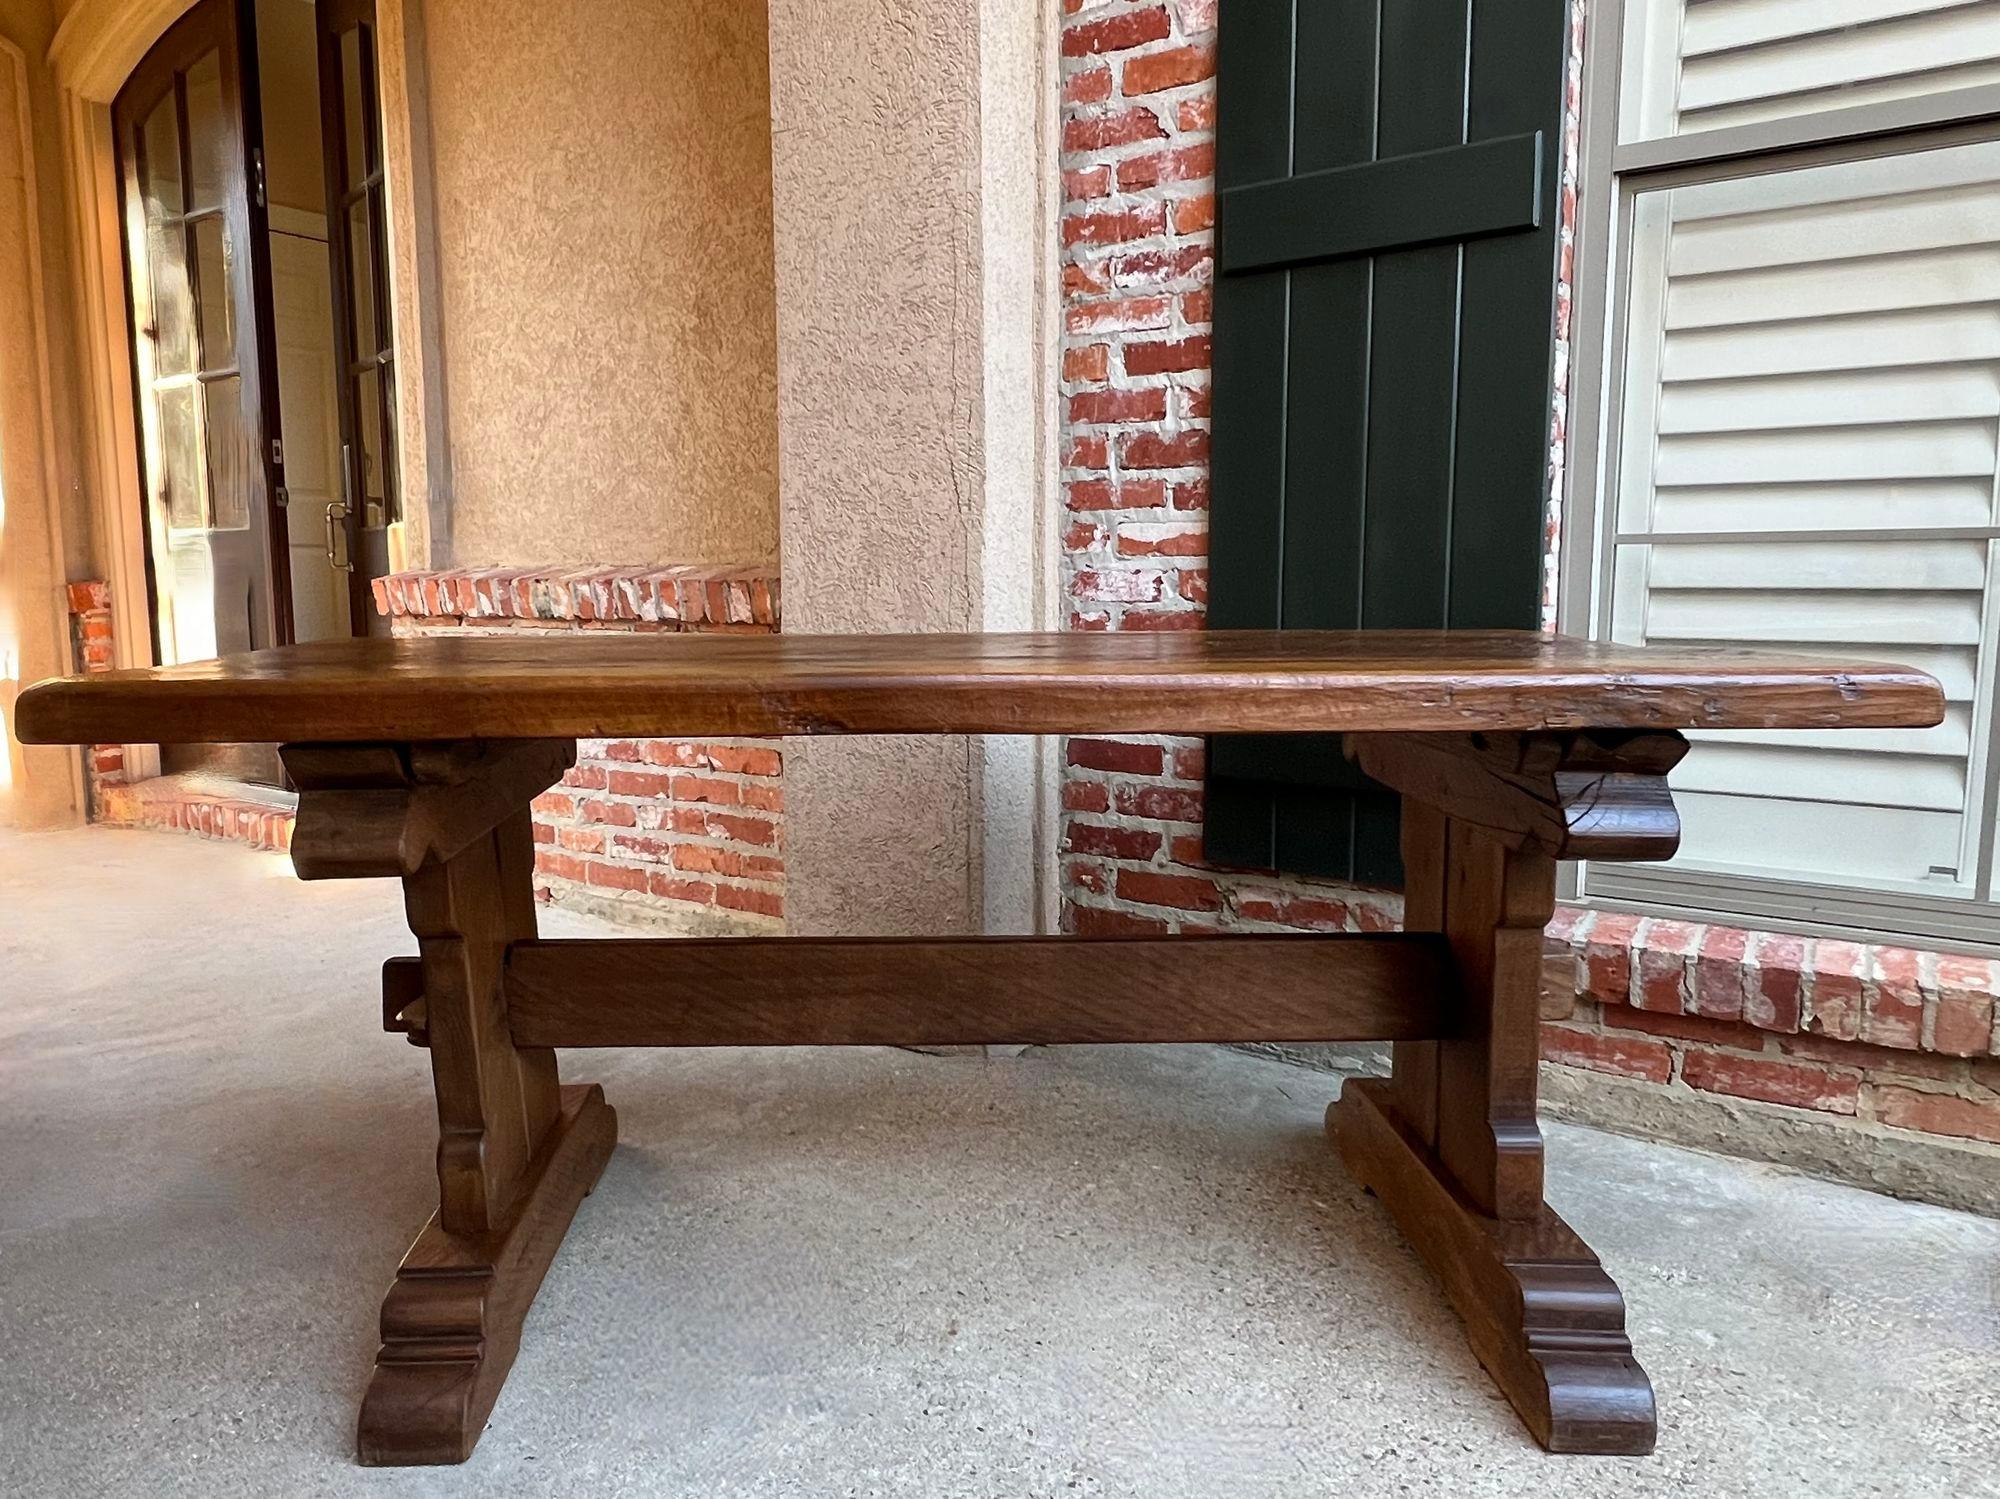 Antique French Farm Table Dining Trestle Desk Oak 6 ft Conference circa1850.

Direct from France, a fabulous 19th century antique French oak dining table (or conference/library table). Hand crafted, heavy plank panel top, with classic trestle sides